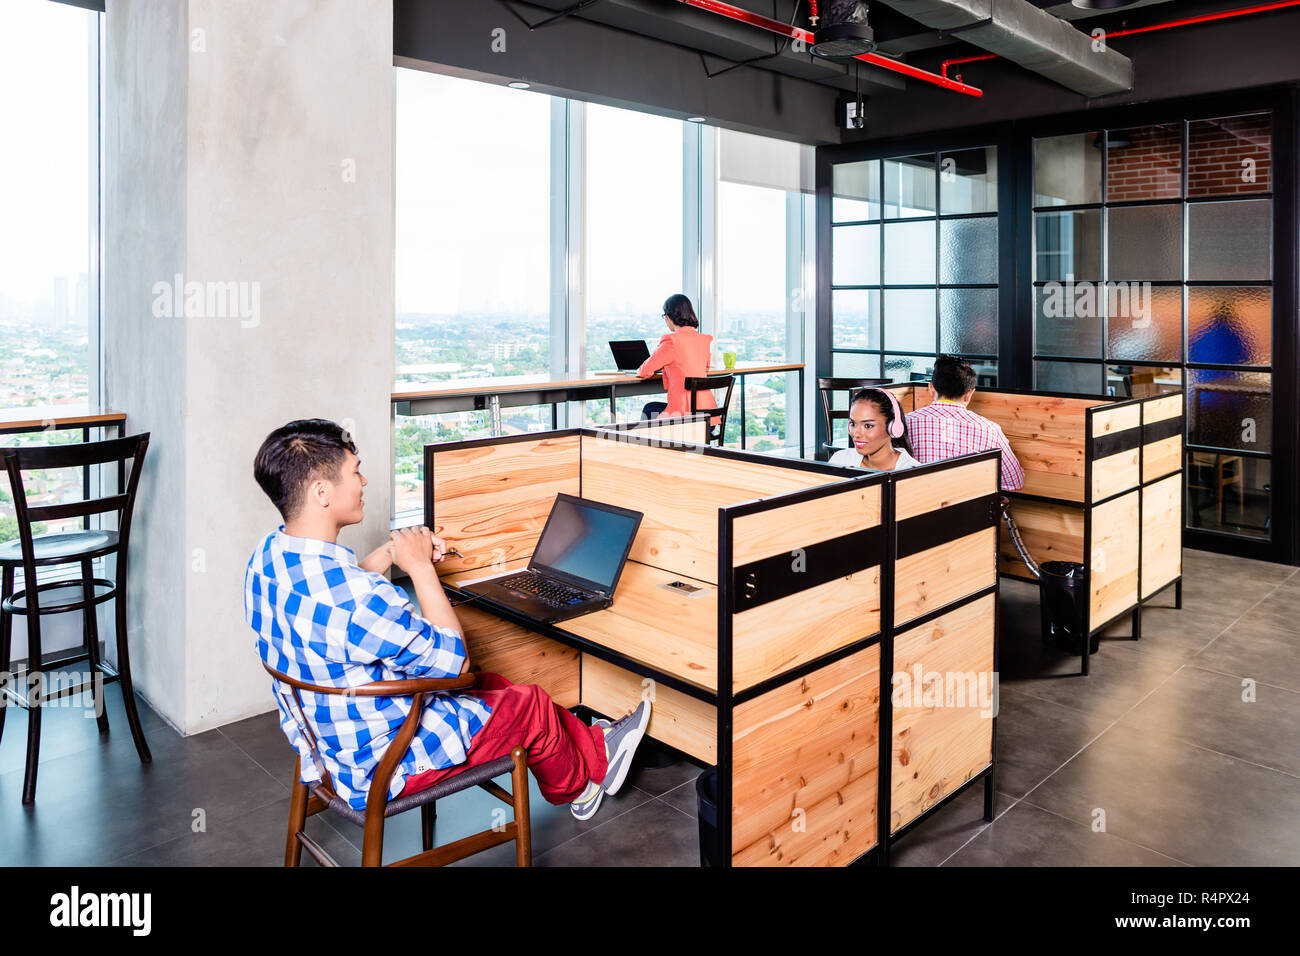 Start-up business people in coworking office Stock Photo